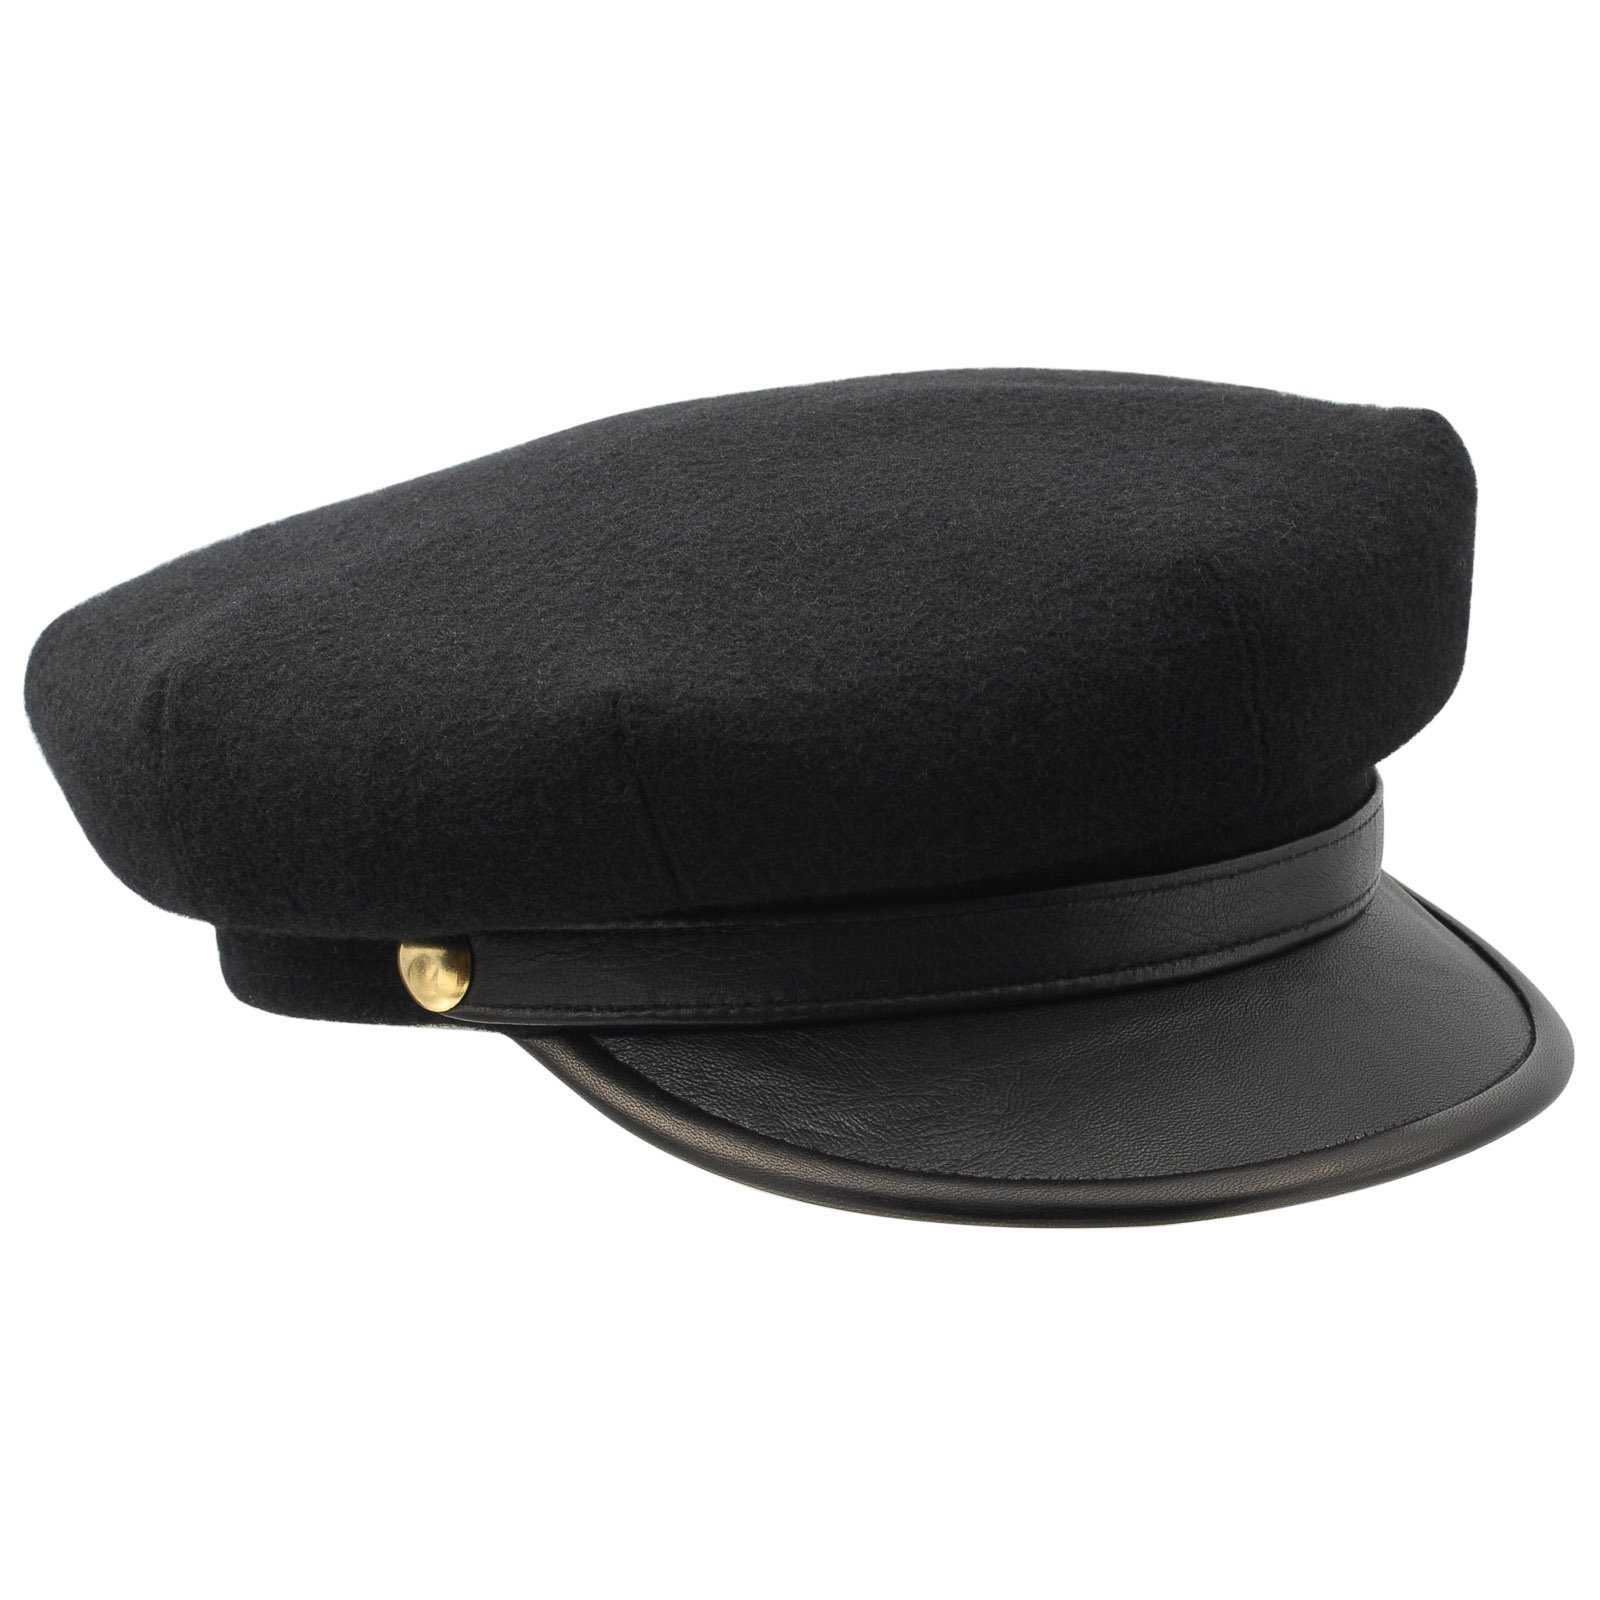 MOTO Motorcycle peaked cap with leather brim and cloth